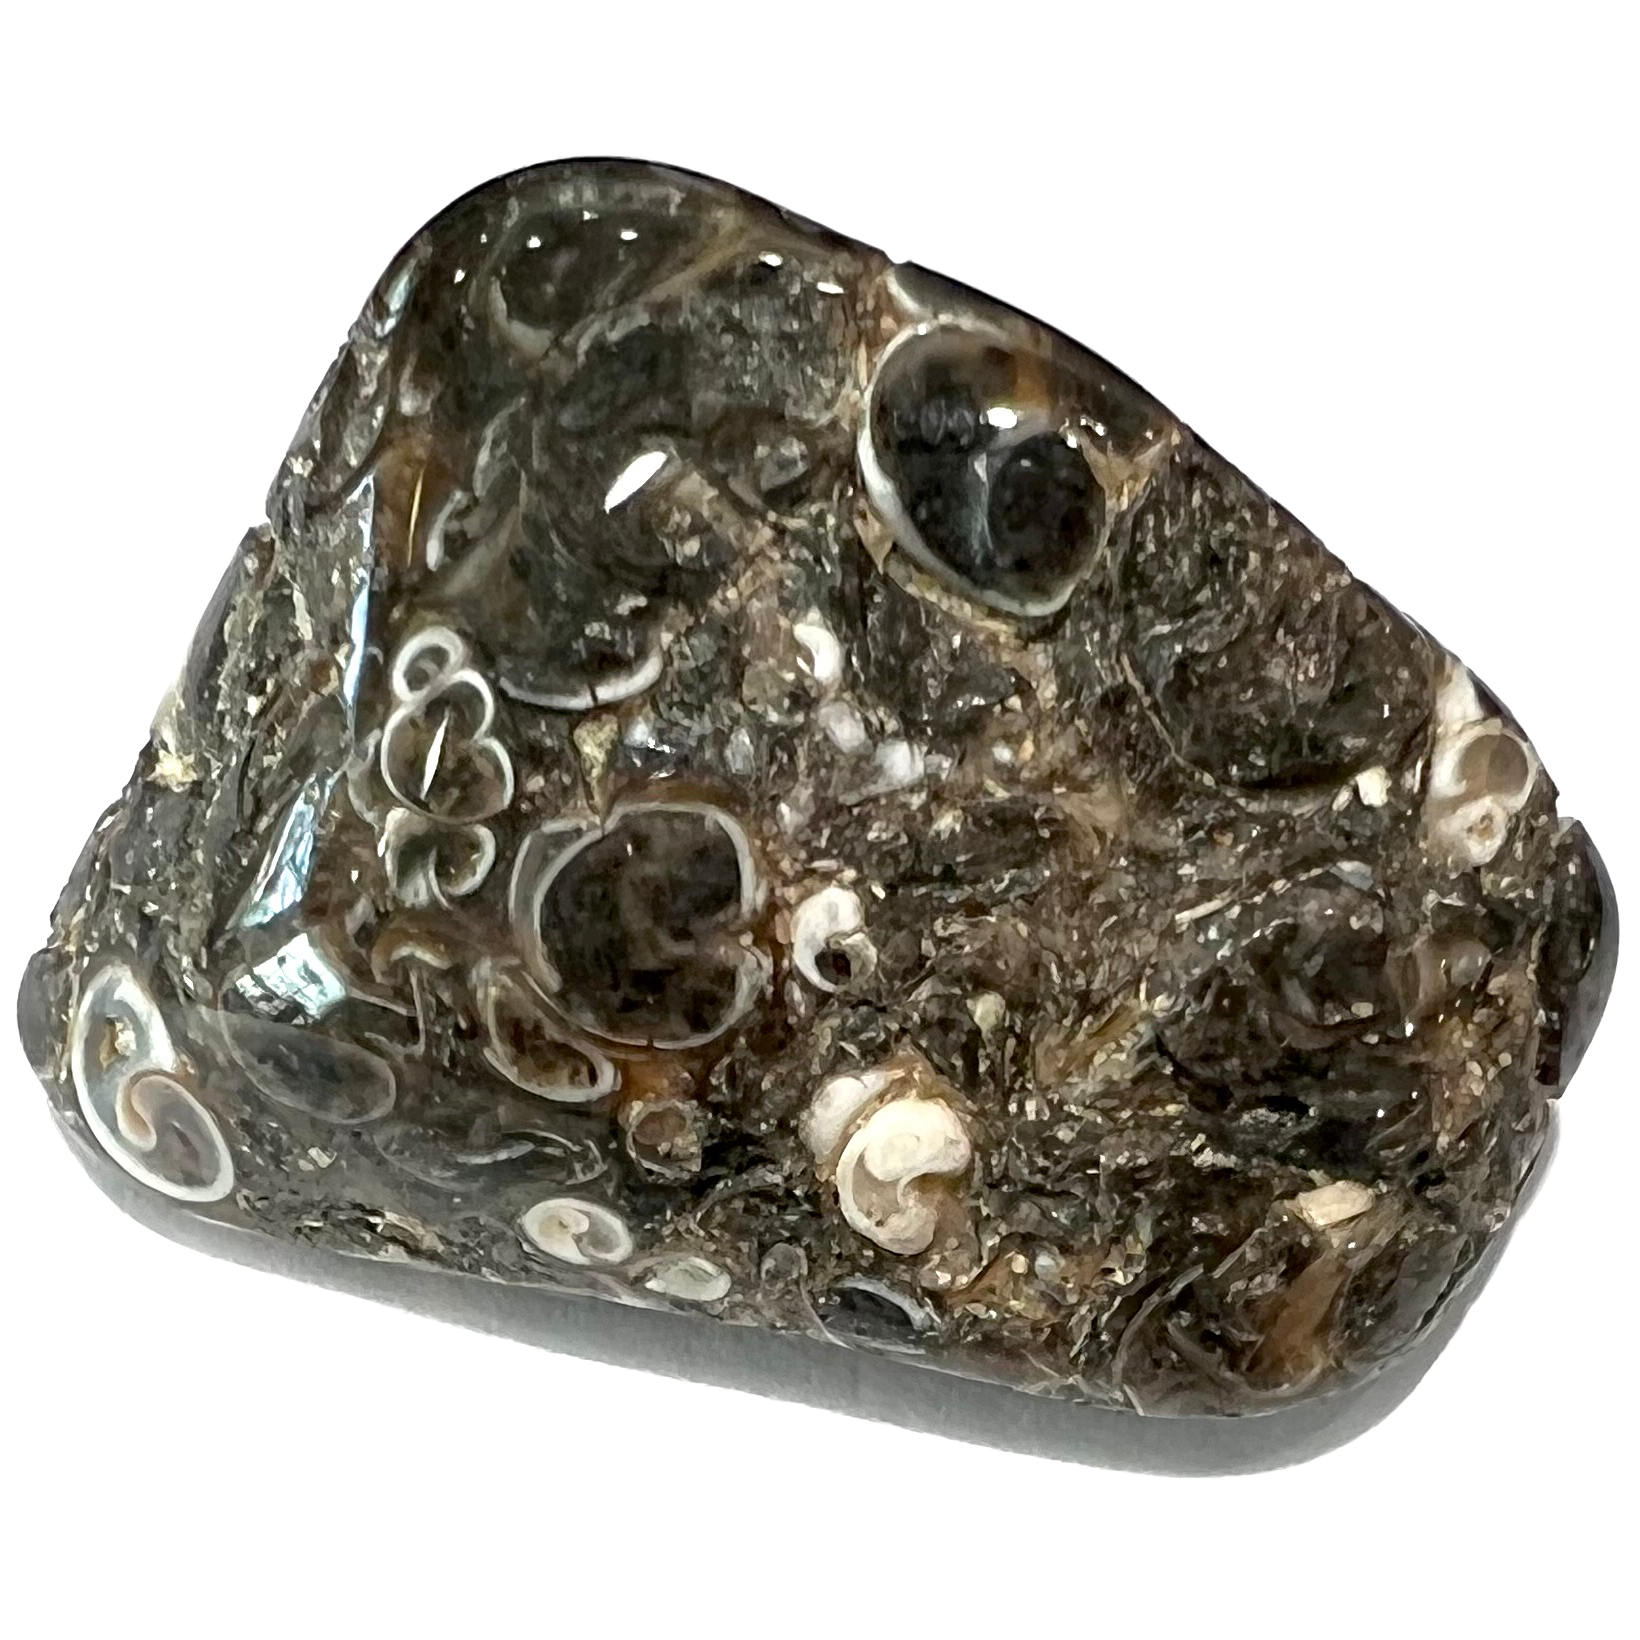 A tumble polished turritella fossil agate stone.  The stone is a gray conglomerate of seashells.